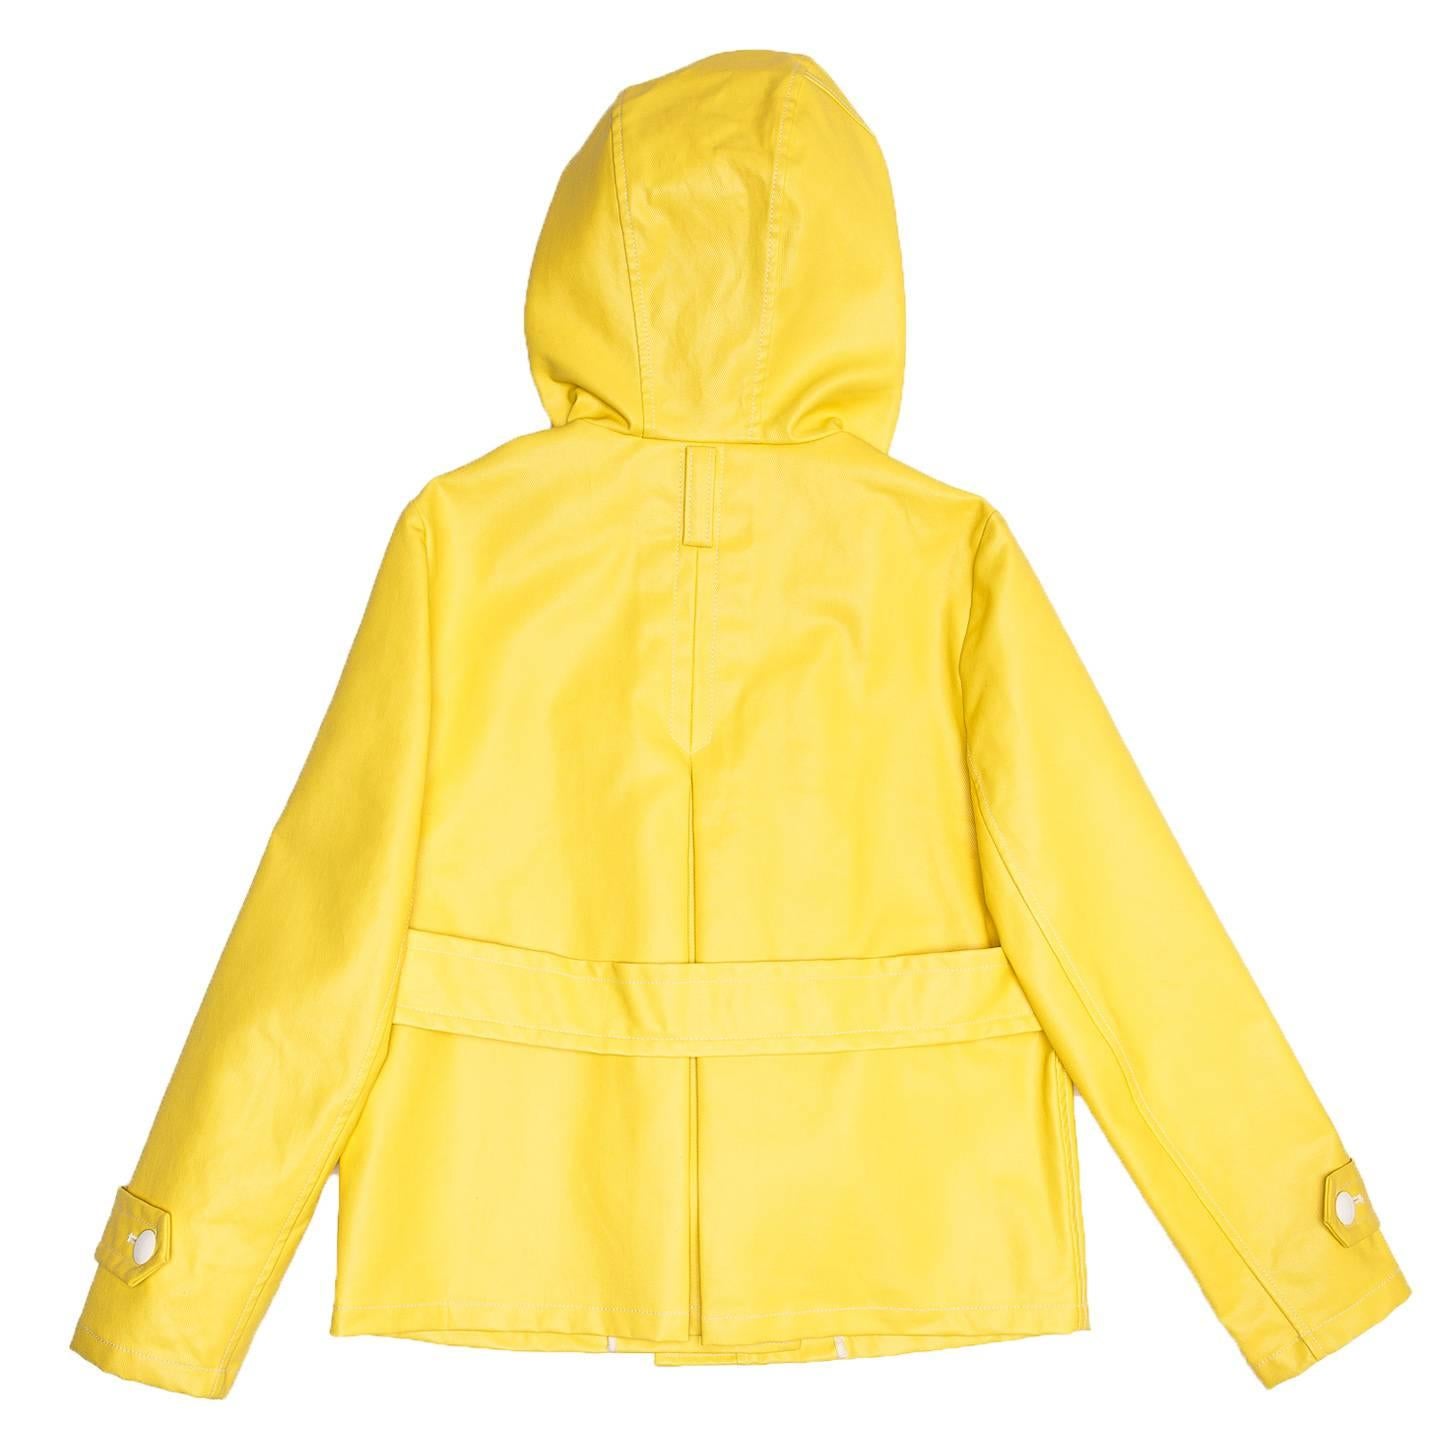 Phillip Lim Bright Yellow Sailor Slicker In New Condition For Sale In Brooklyn, NY